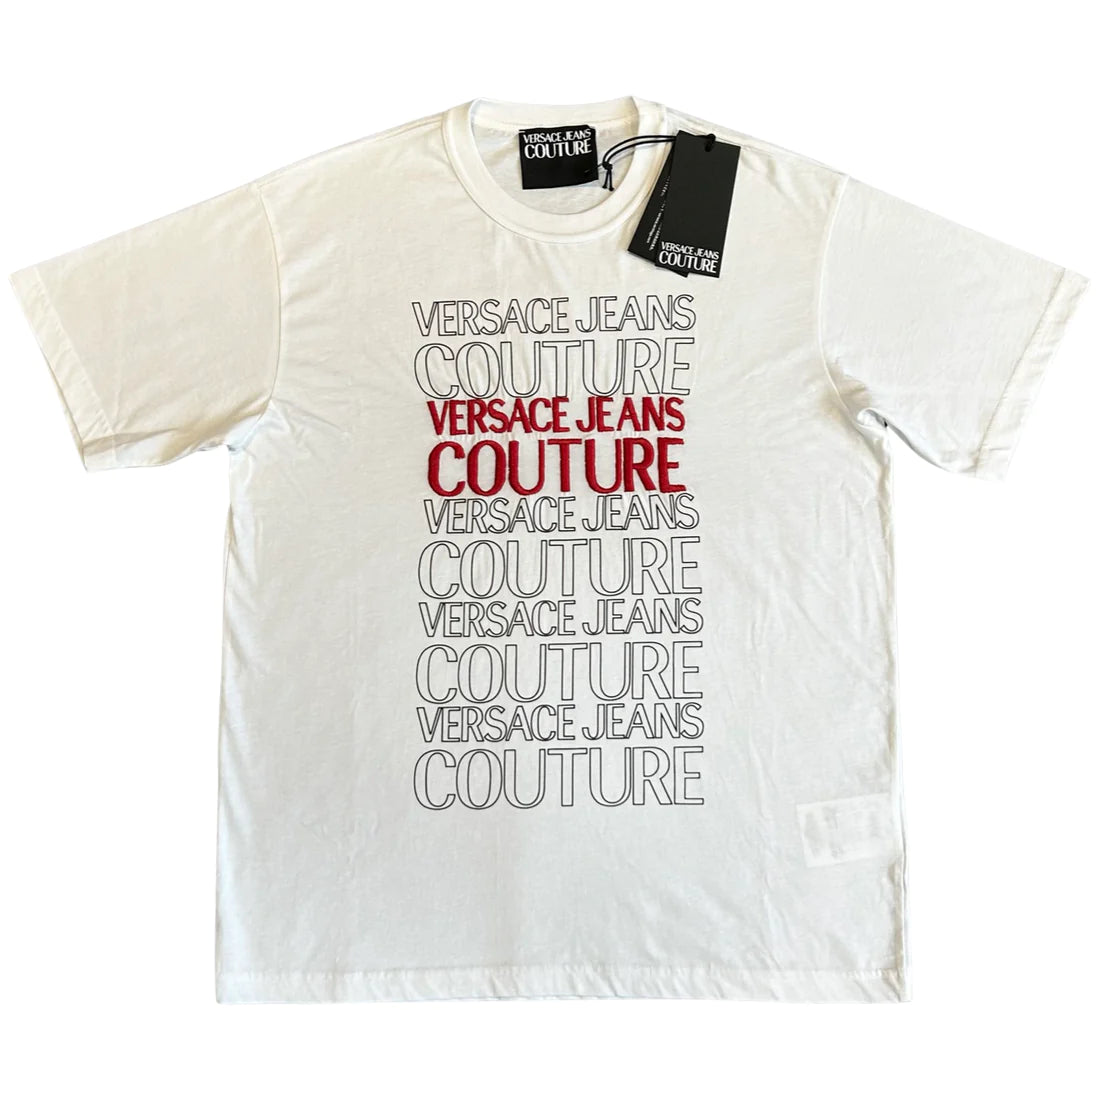 VERSACE JEANS COUTURE T-SHIRT - WHITE